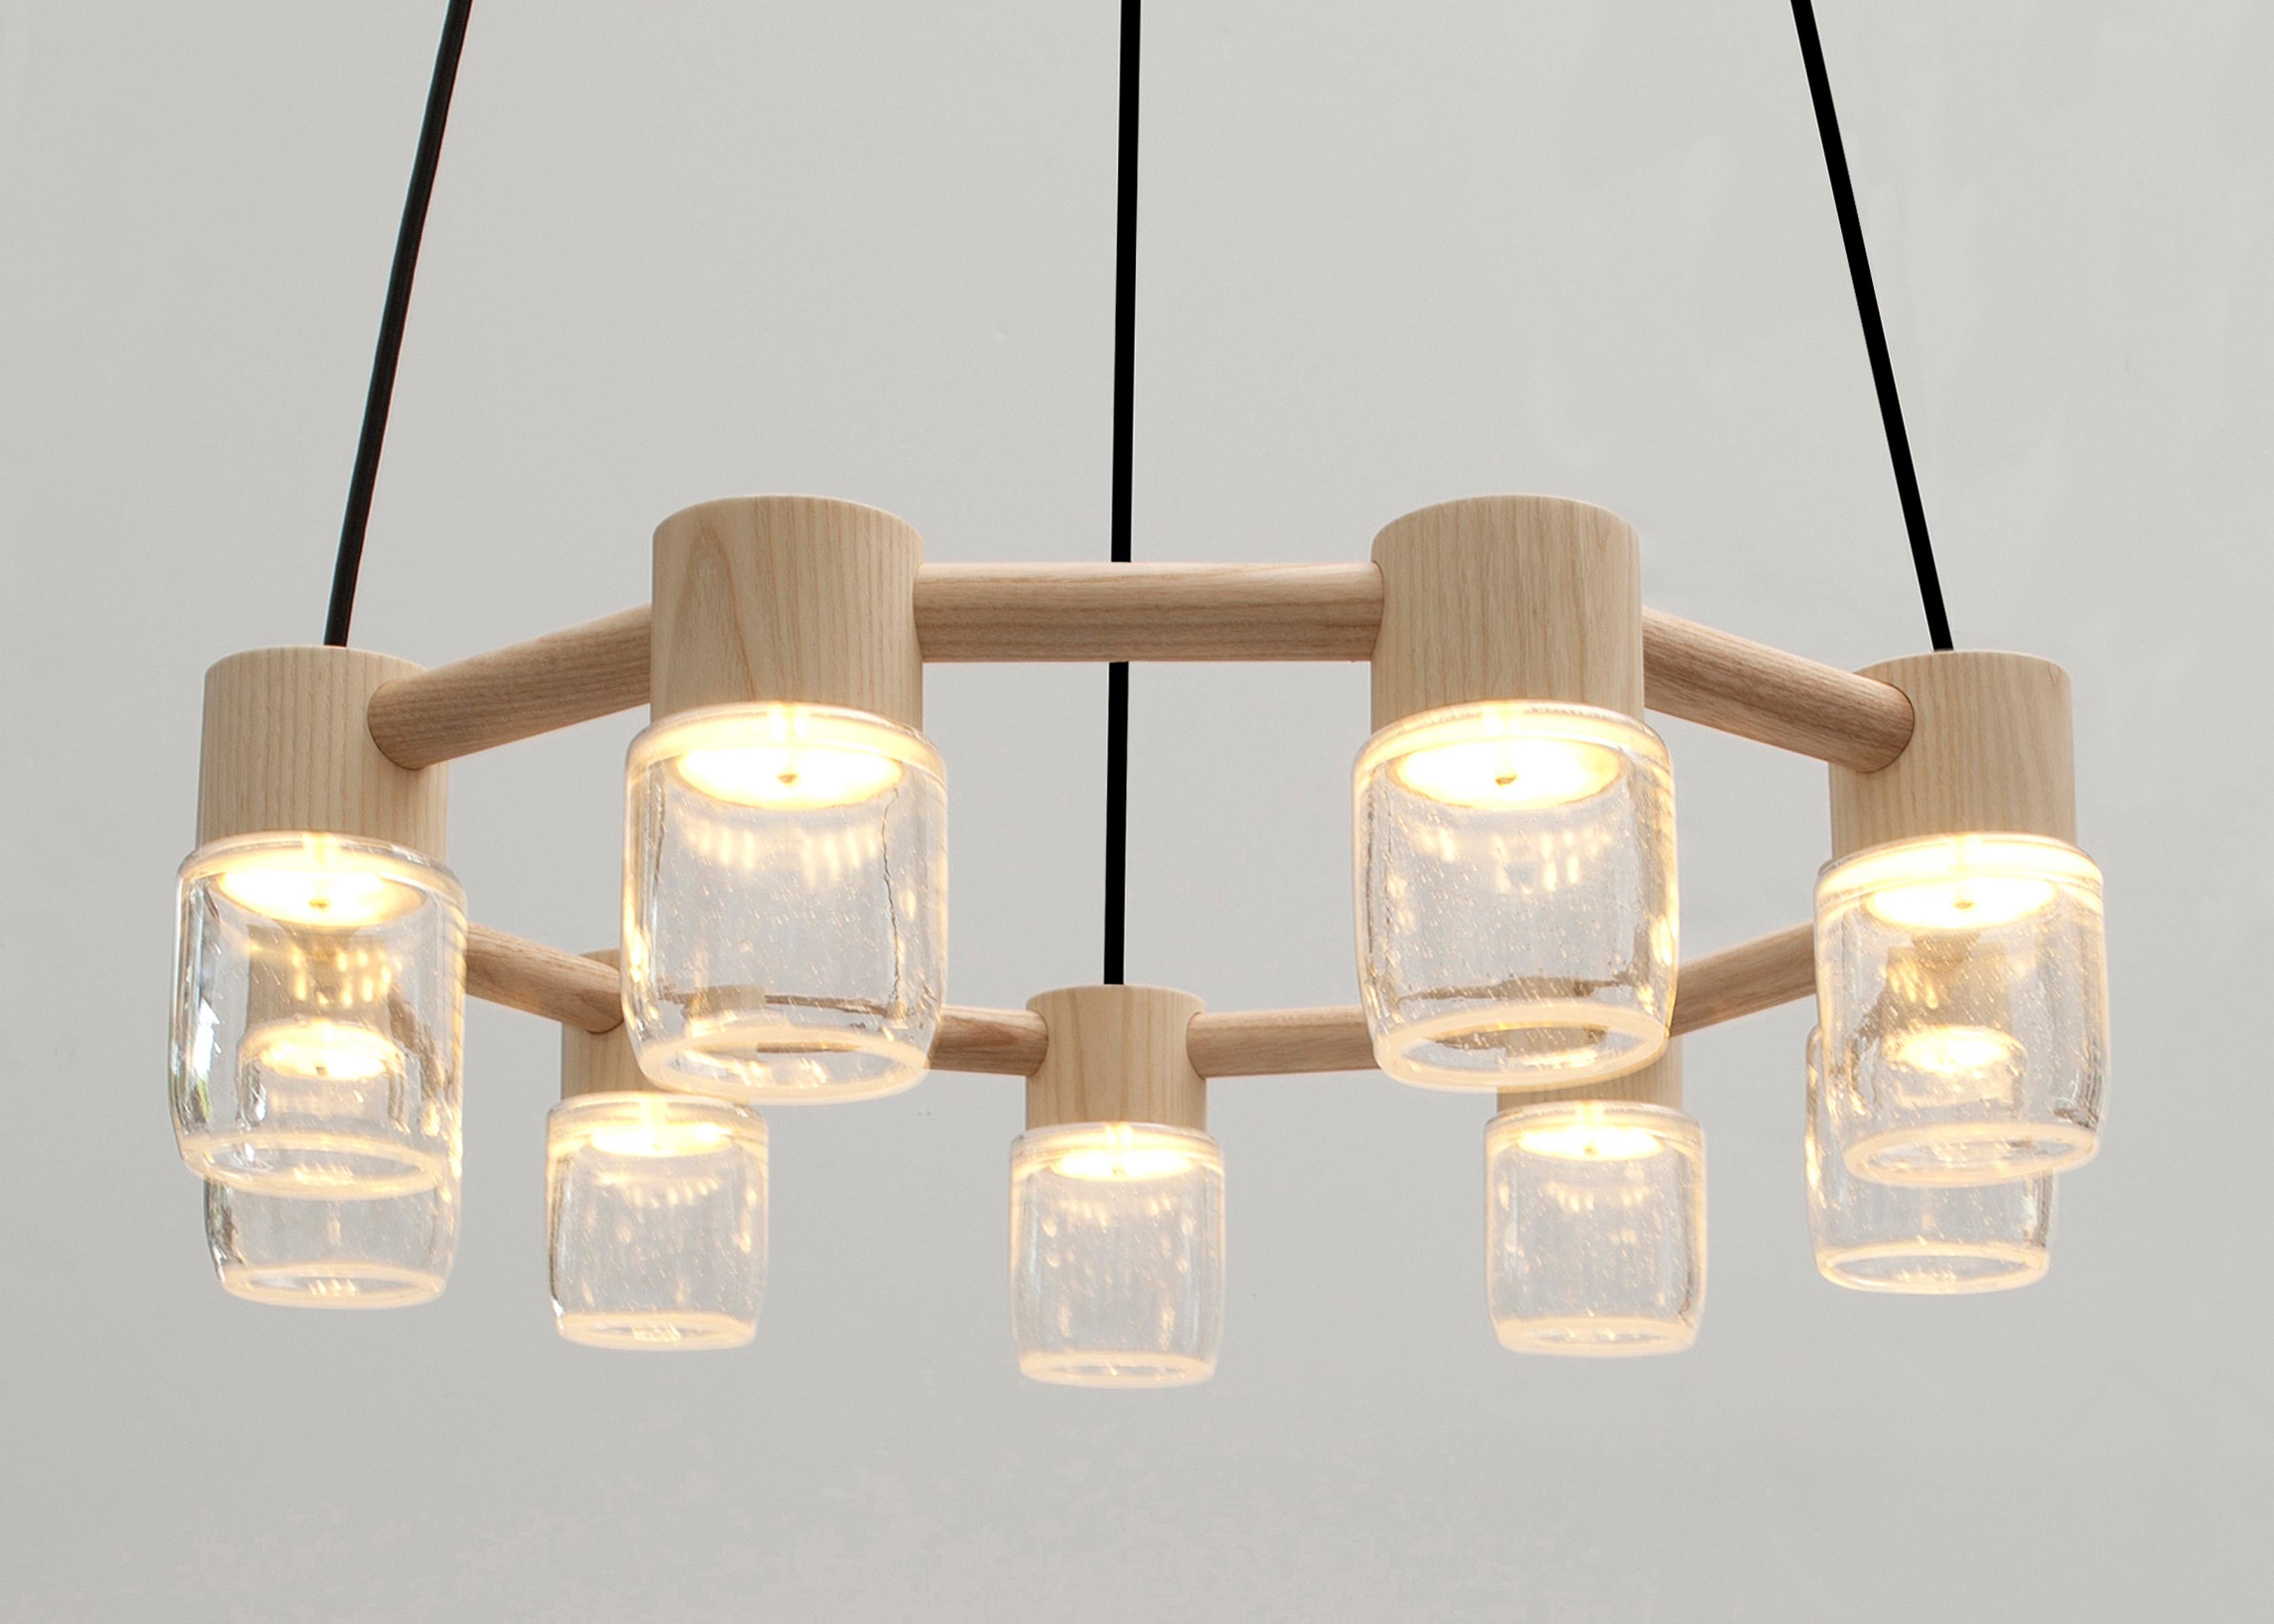 This handmade chandelier pairs a minimal solid wood canopy with nine hand blown glass diffusers. Efficient LED lighting components are neatly hidden in each canopy allowing the glass diffusers to illuminate without a visible bulb. 

Built in the